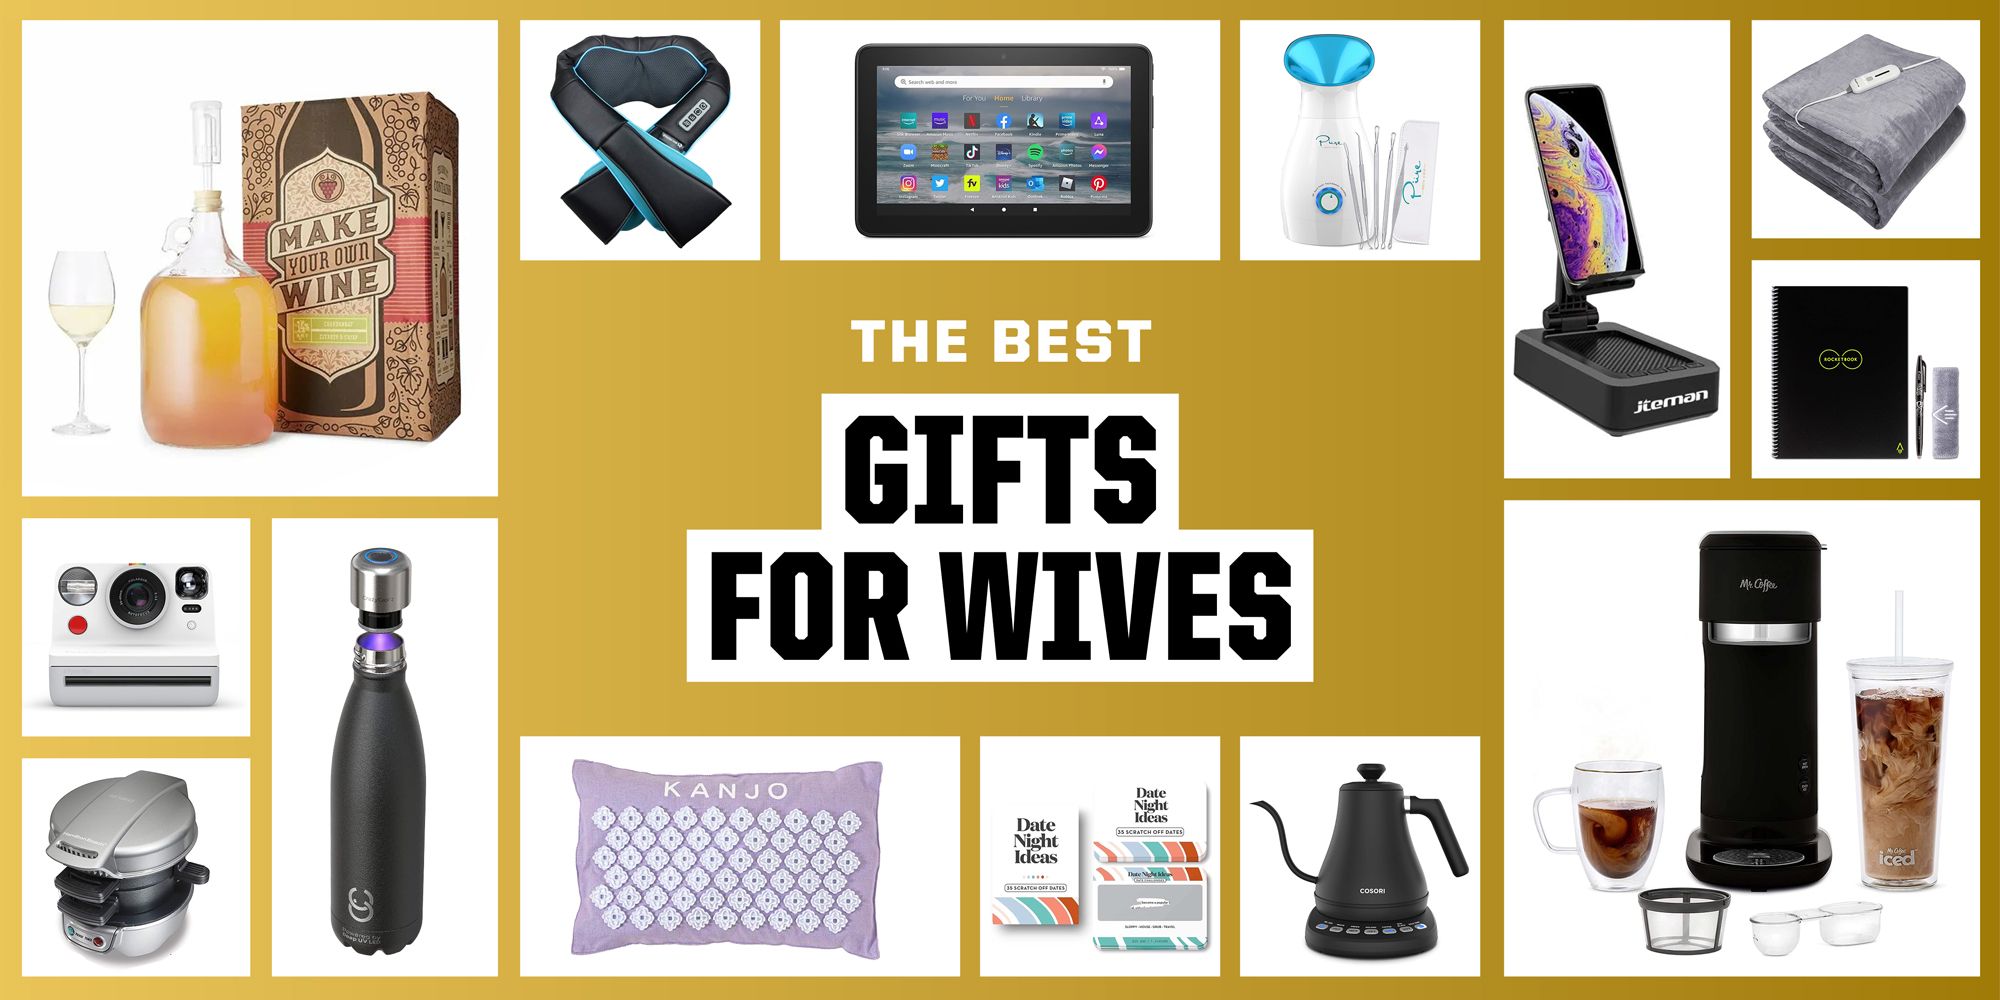 7 Awesome Gift Ideas For The Special Women In Your Life – Ferns N Petals